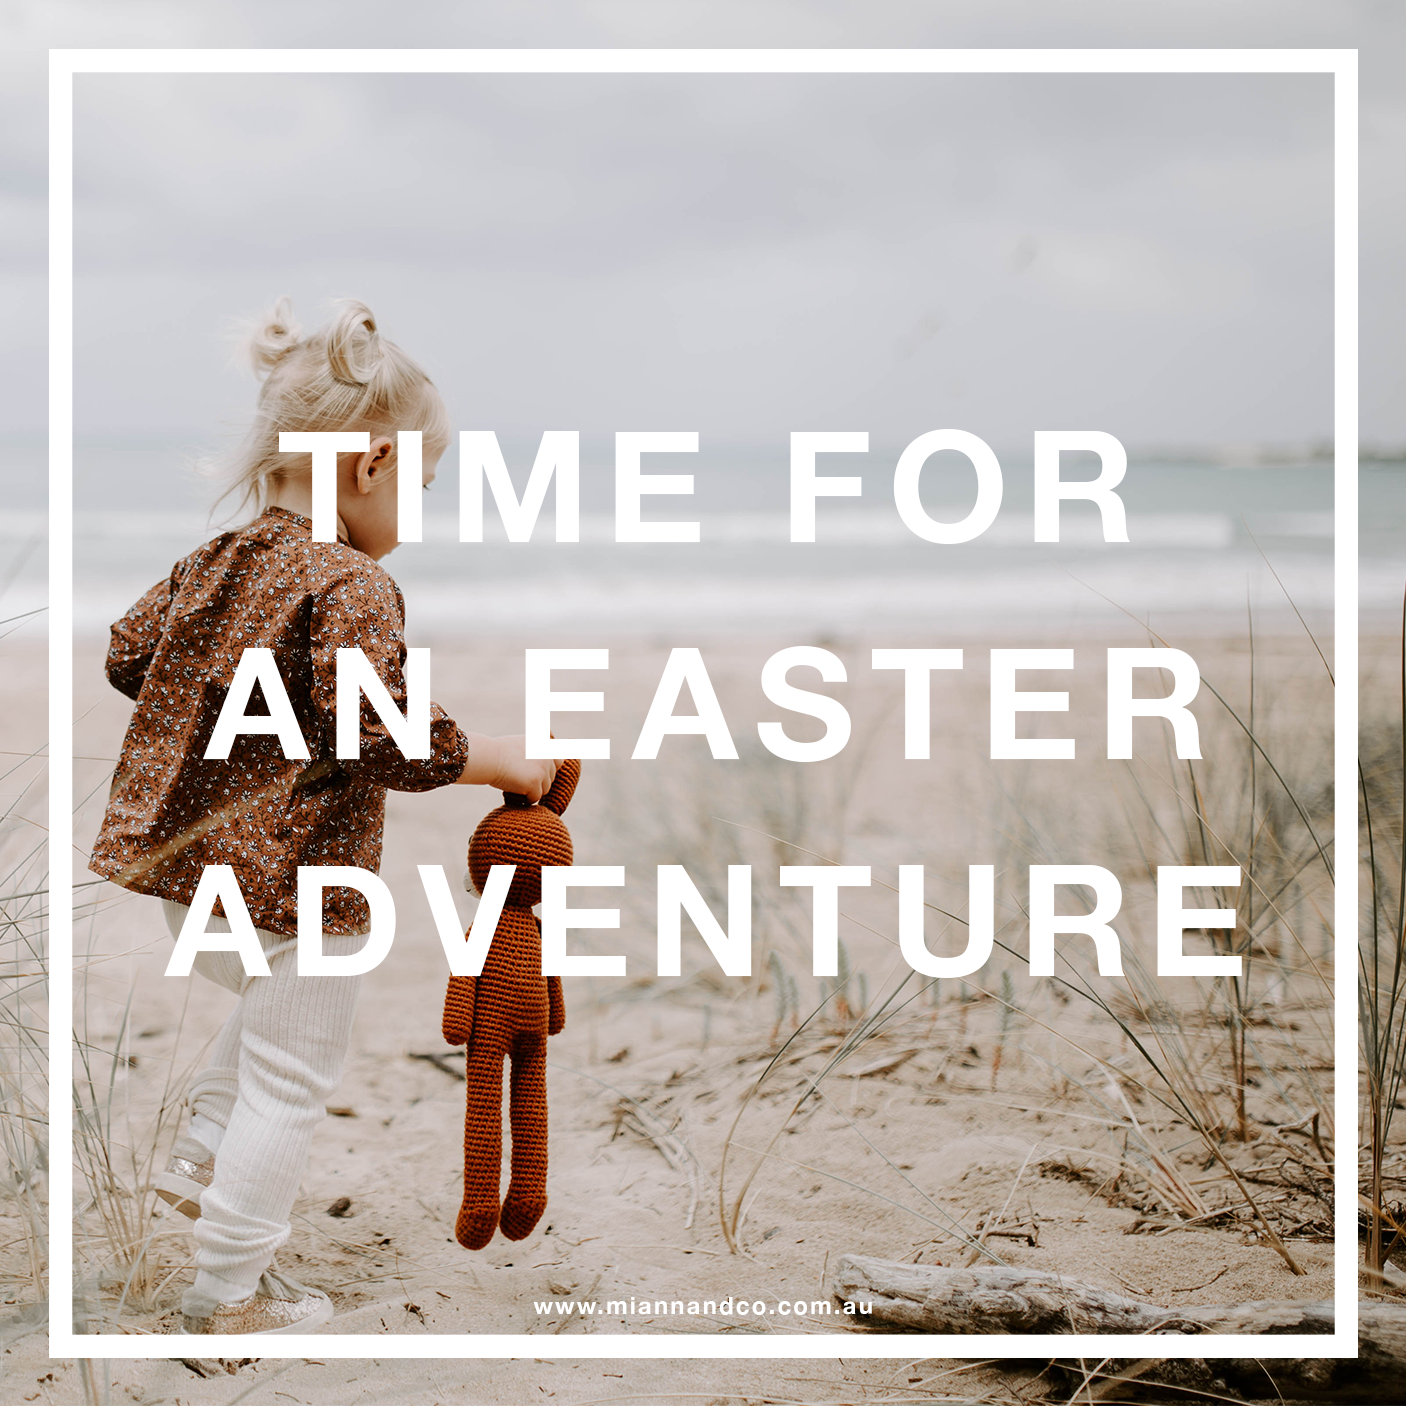 TIME FOR AN EASTER ADVENTURE